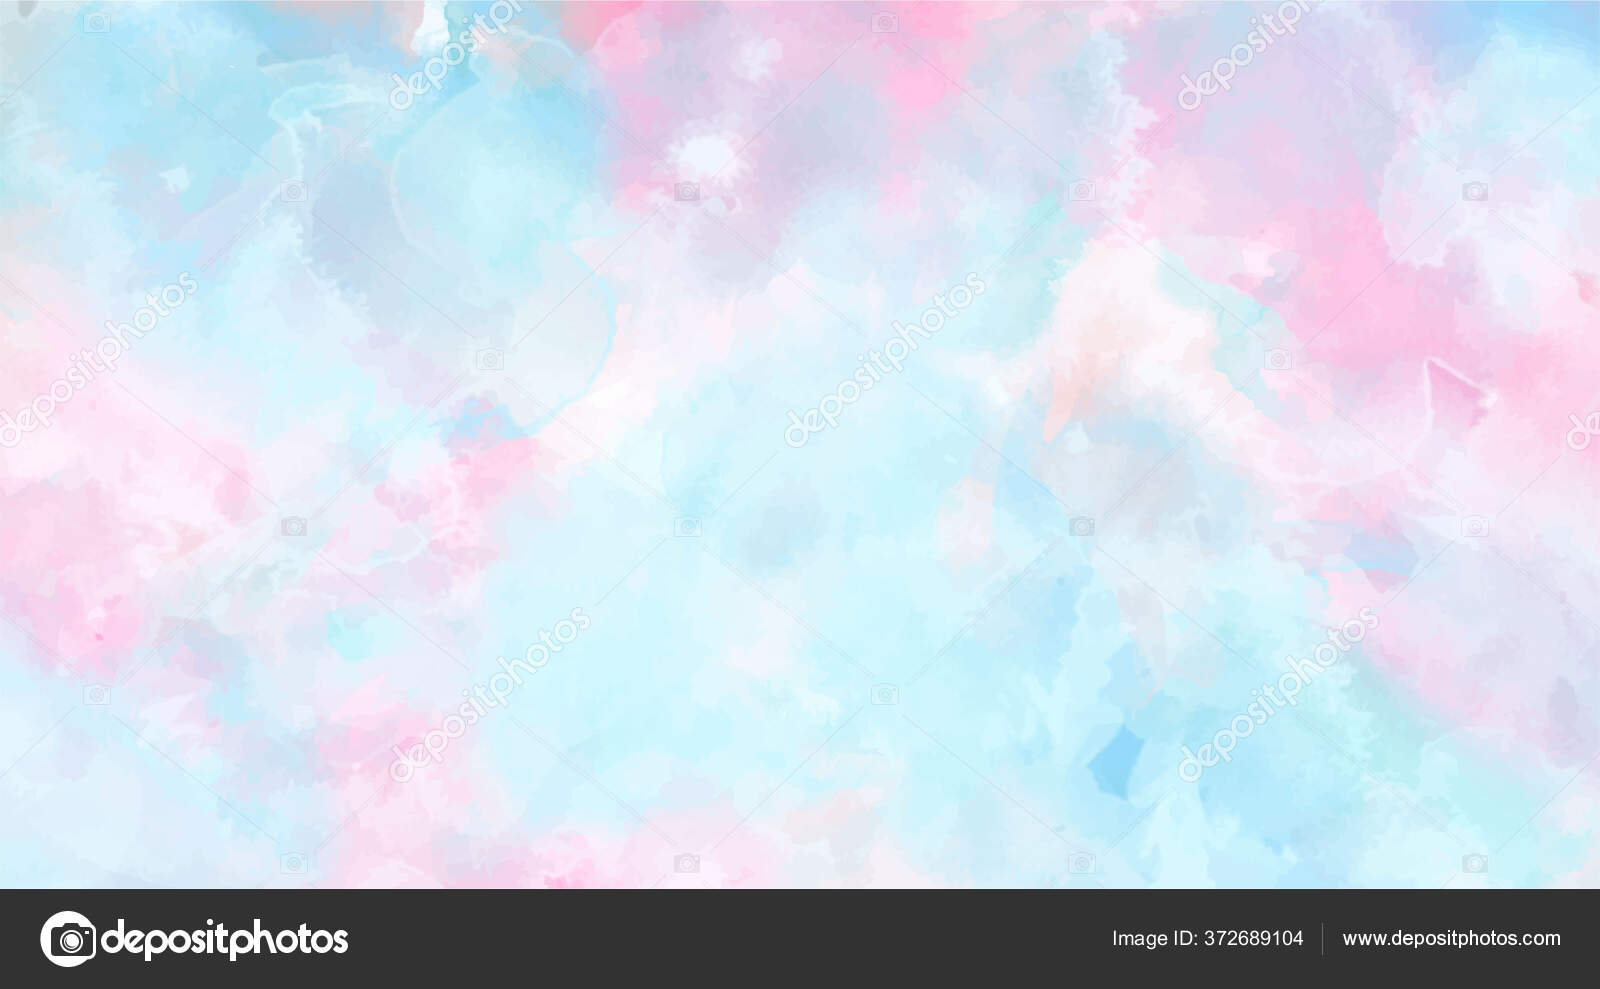 Abstract Brush Strokes Soft On Paper Pastel Pink Blue And White Background  Backgrounds